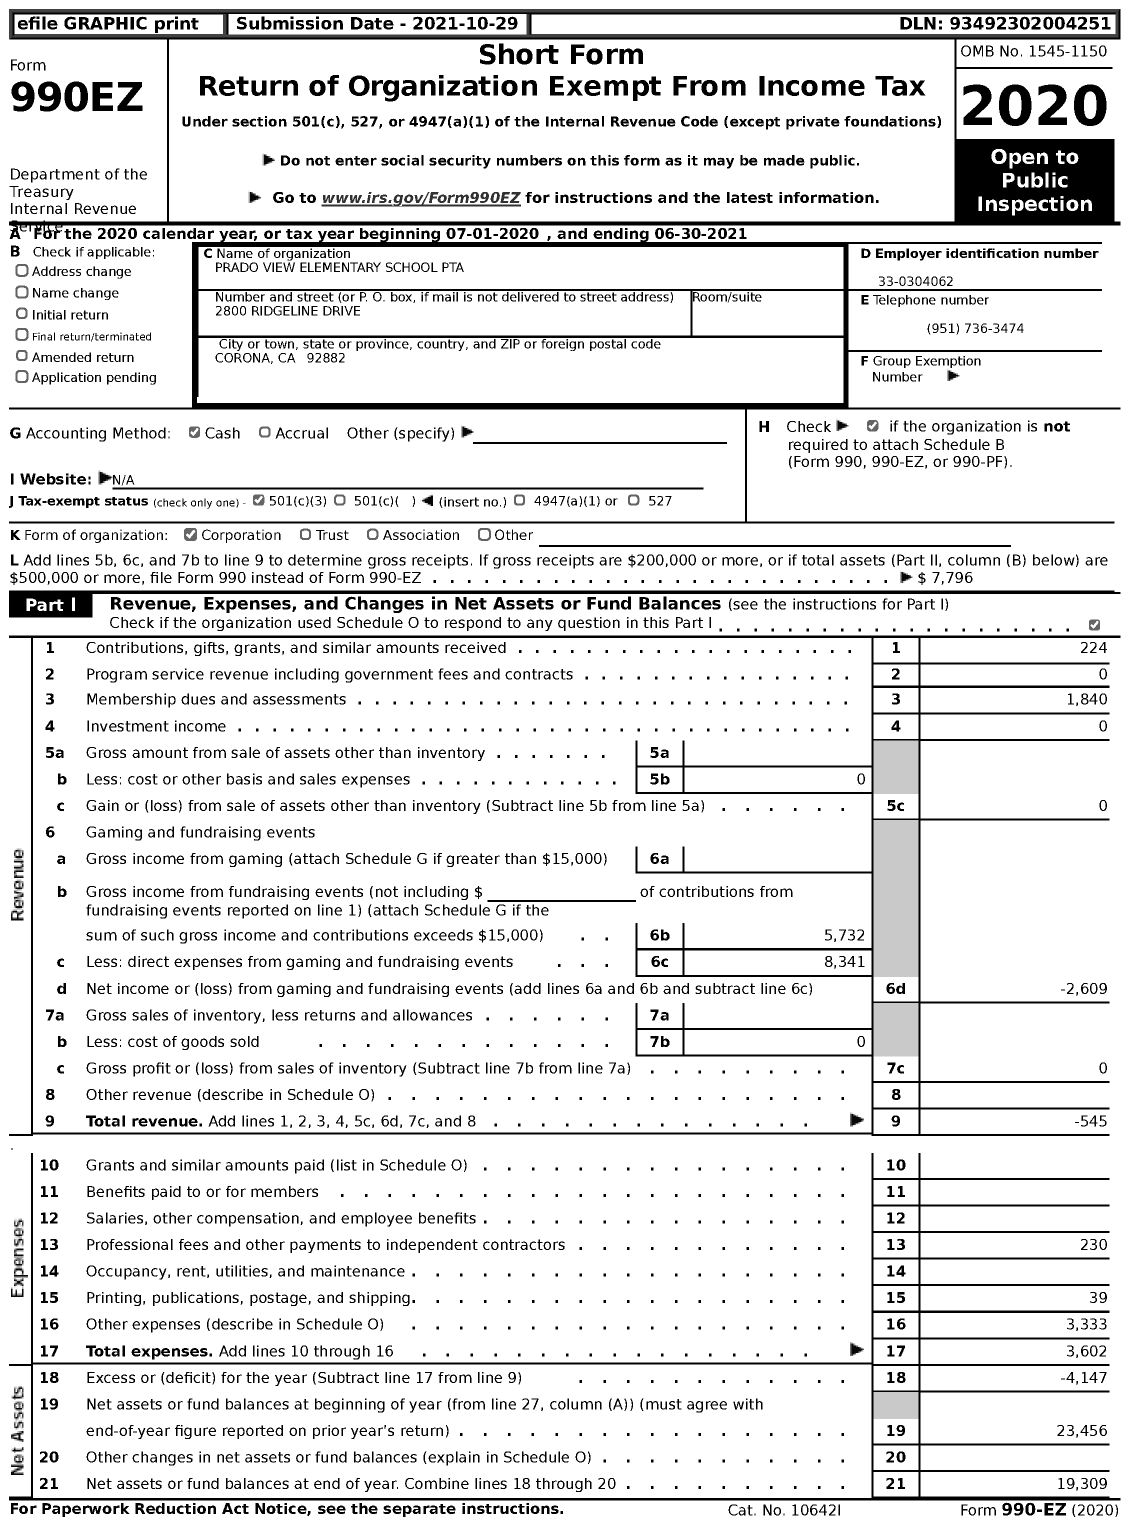 Image of first page of 2020 Form 990EZ for California State PTA - Prado View Elementary PTA